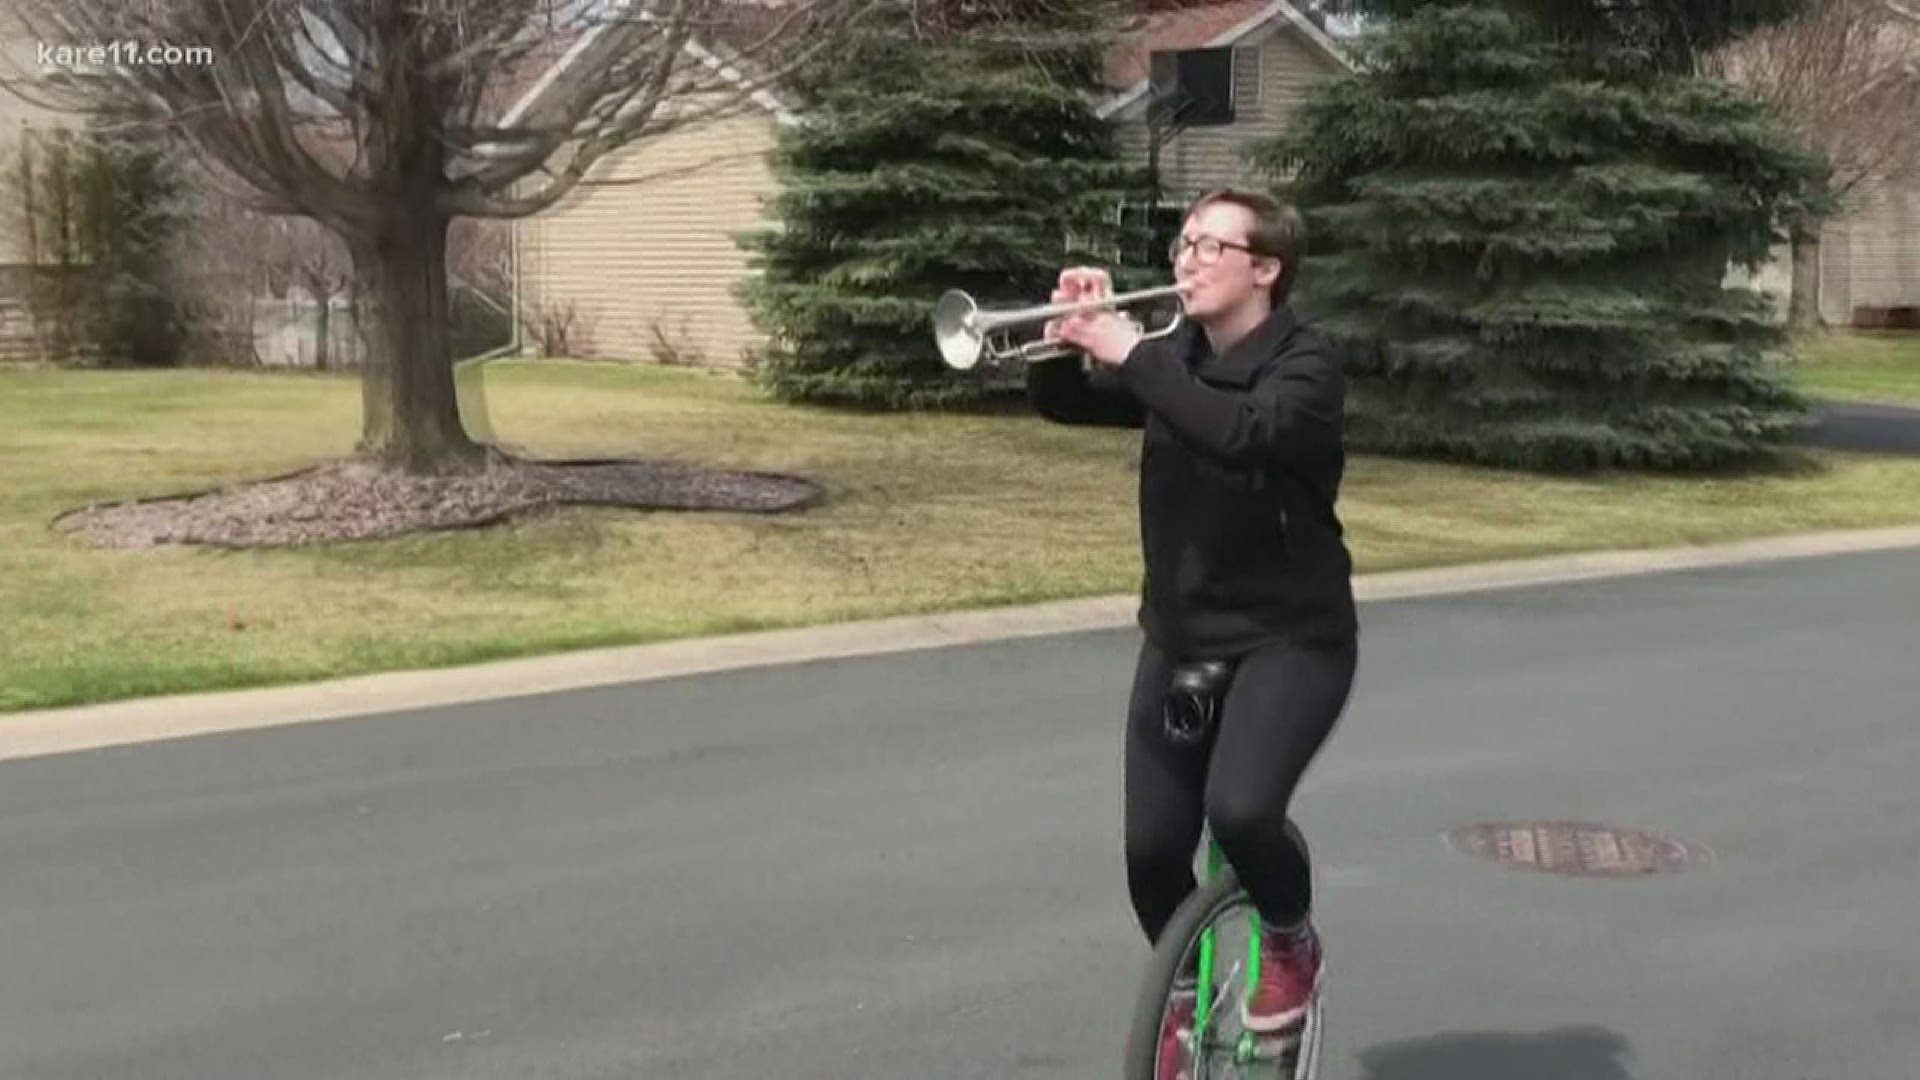 It's a musical edition of "Highlights from Home" as we celebrate a month of KARE 11 viewers' videos!